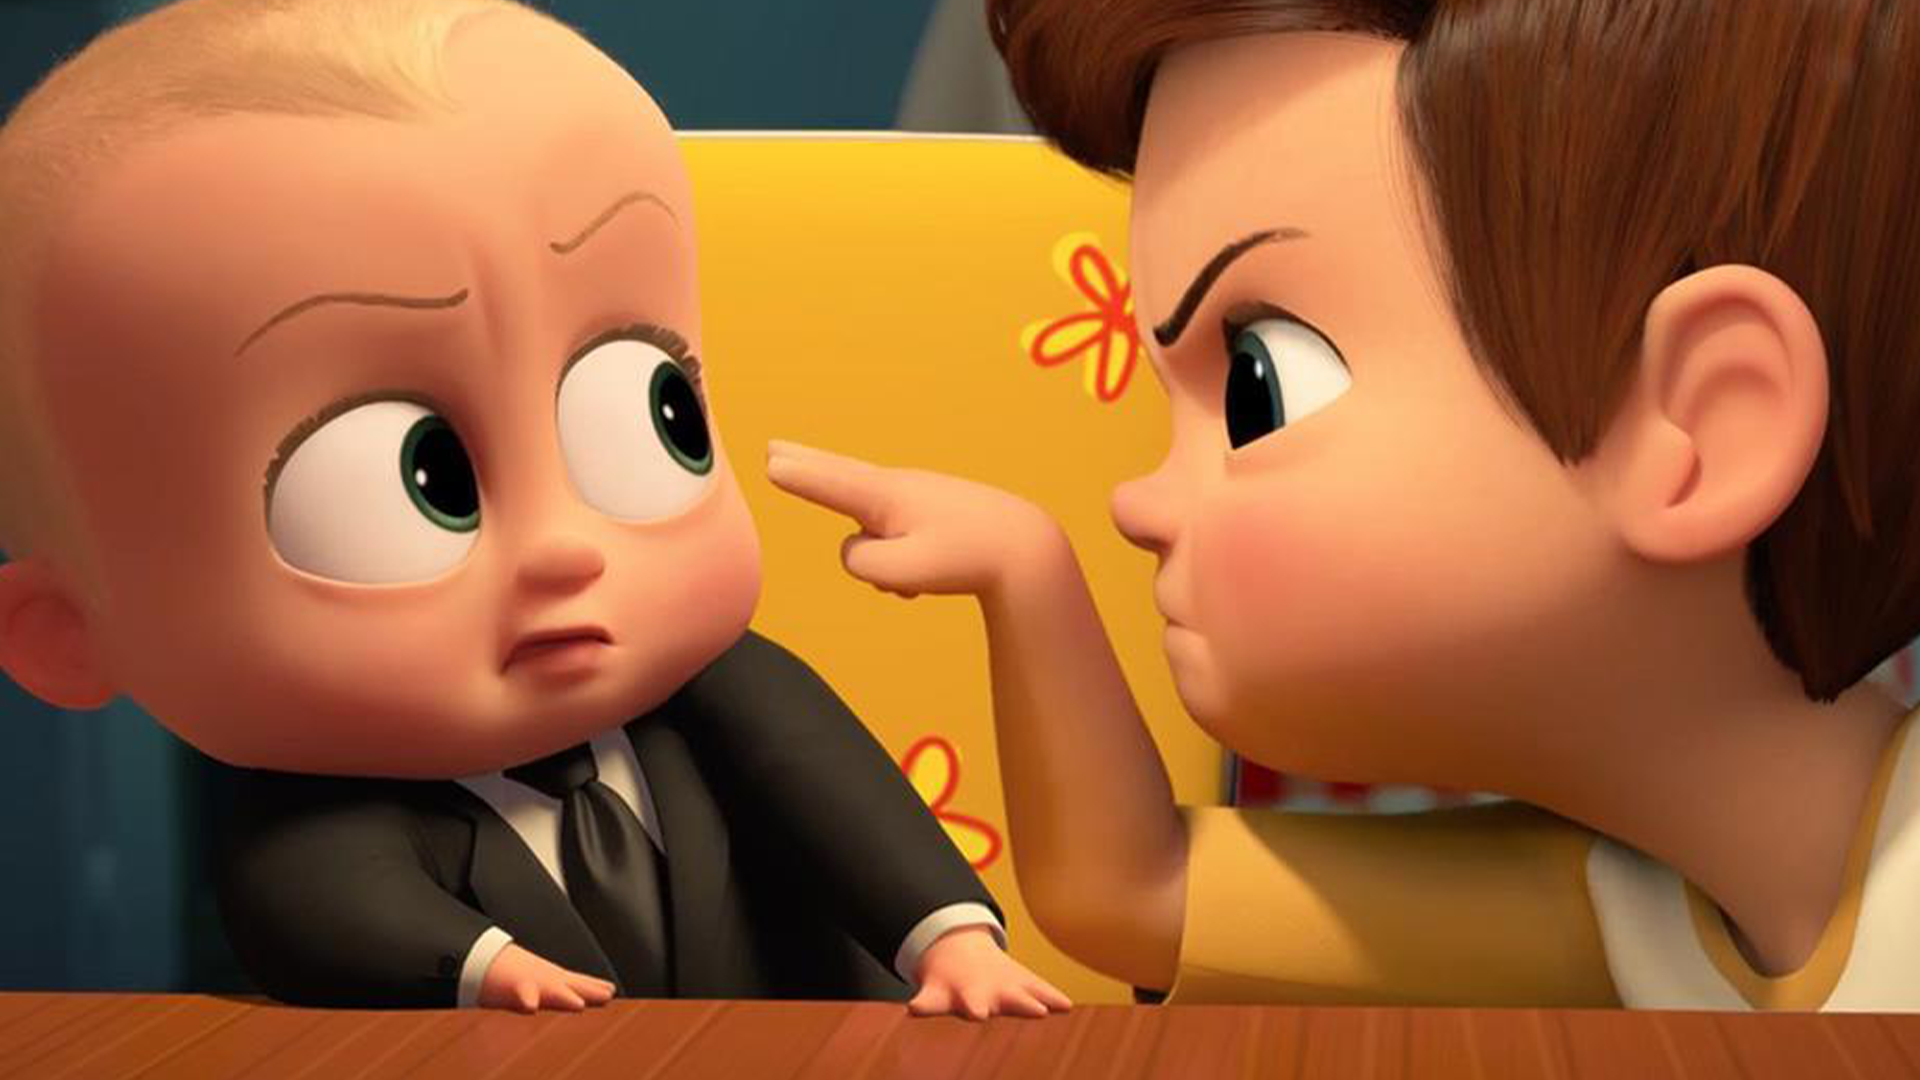 15 Boss Baby Facts You Never Knew!